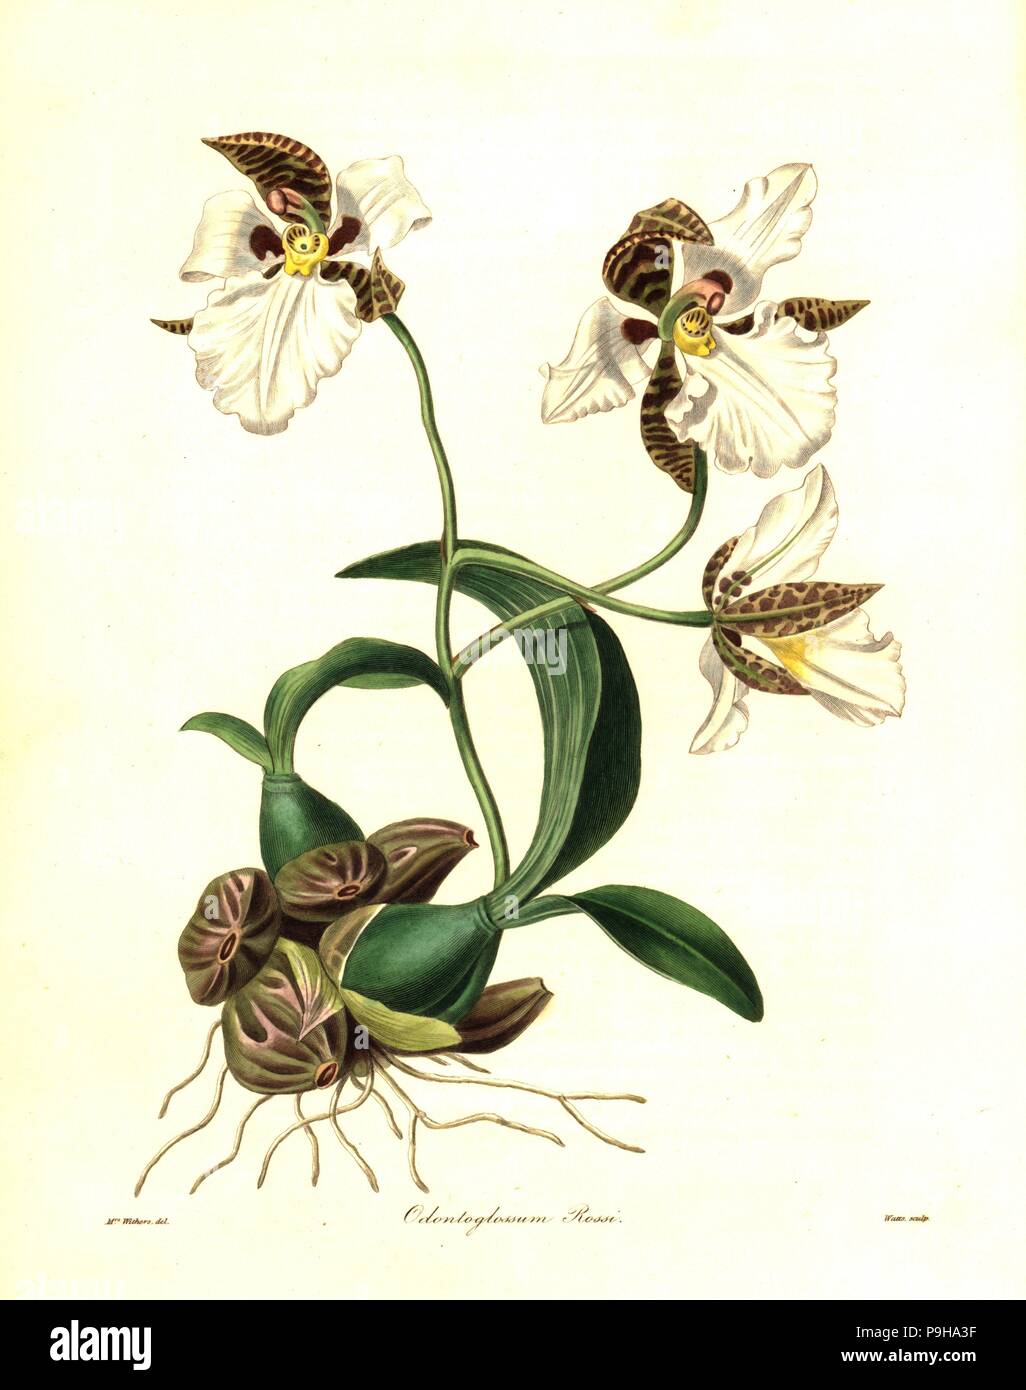 Ross' rhynchostele orchid, Rhynchostele rossii (Ross' odontoglossum, Odontoglossum rossii). Handcoloured copperplate engraving by Watts after a botanical illustration by Mrs Augusta Withers from Benjamin Maund and the Rev. John Stevens Henslow's The Botanist, London, 1836. Stock Photo